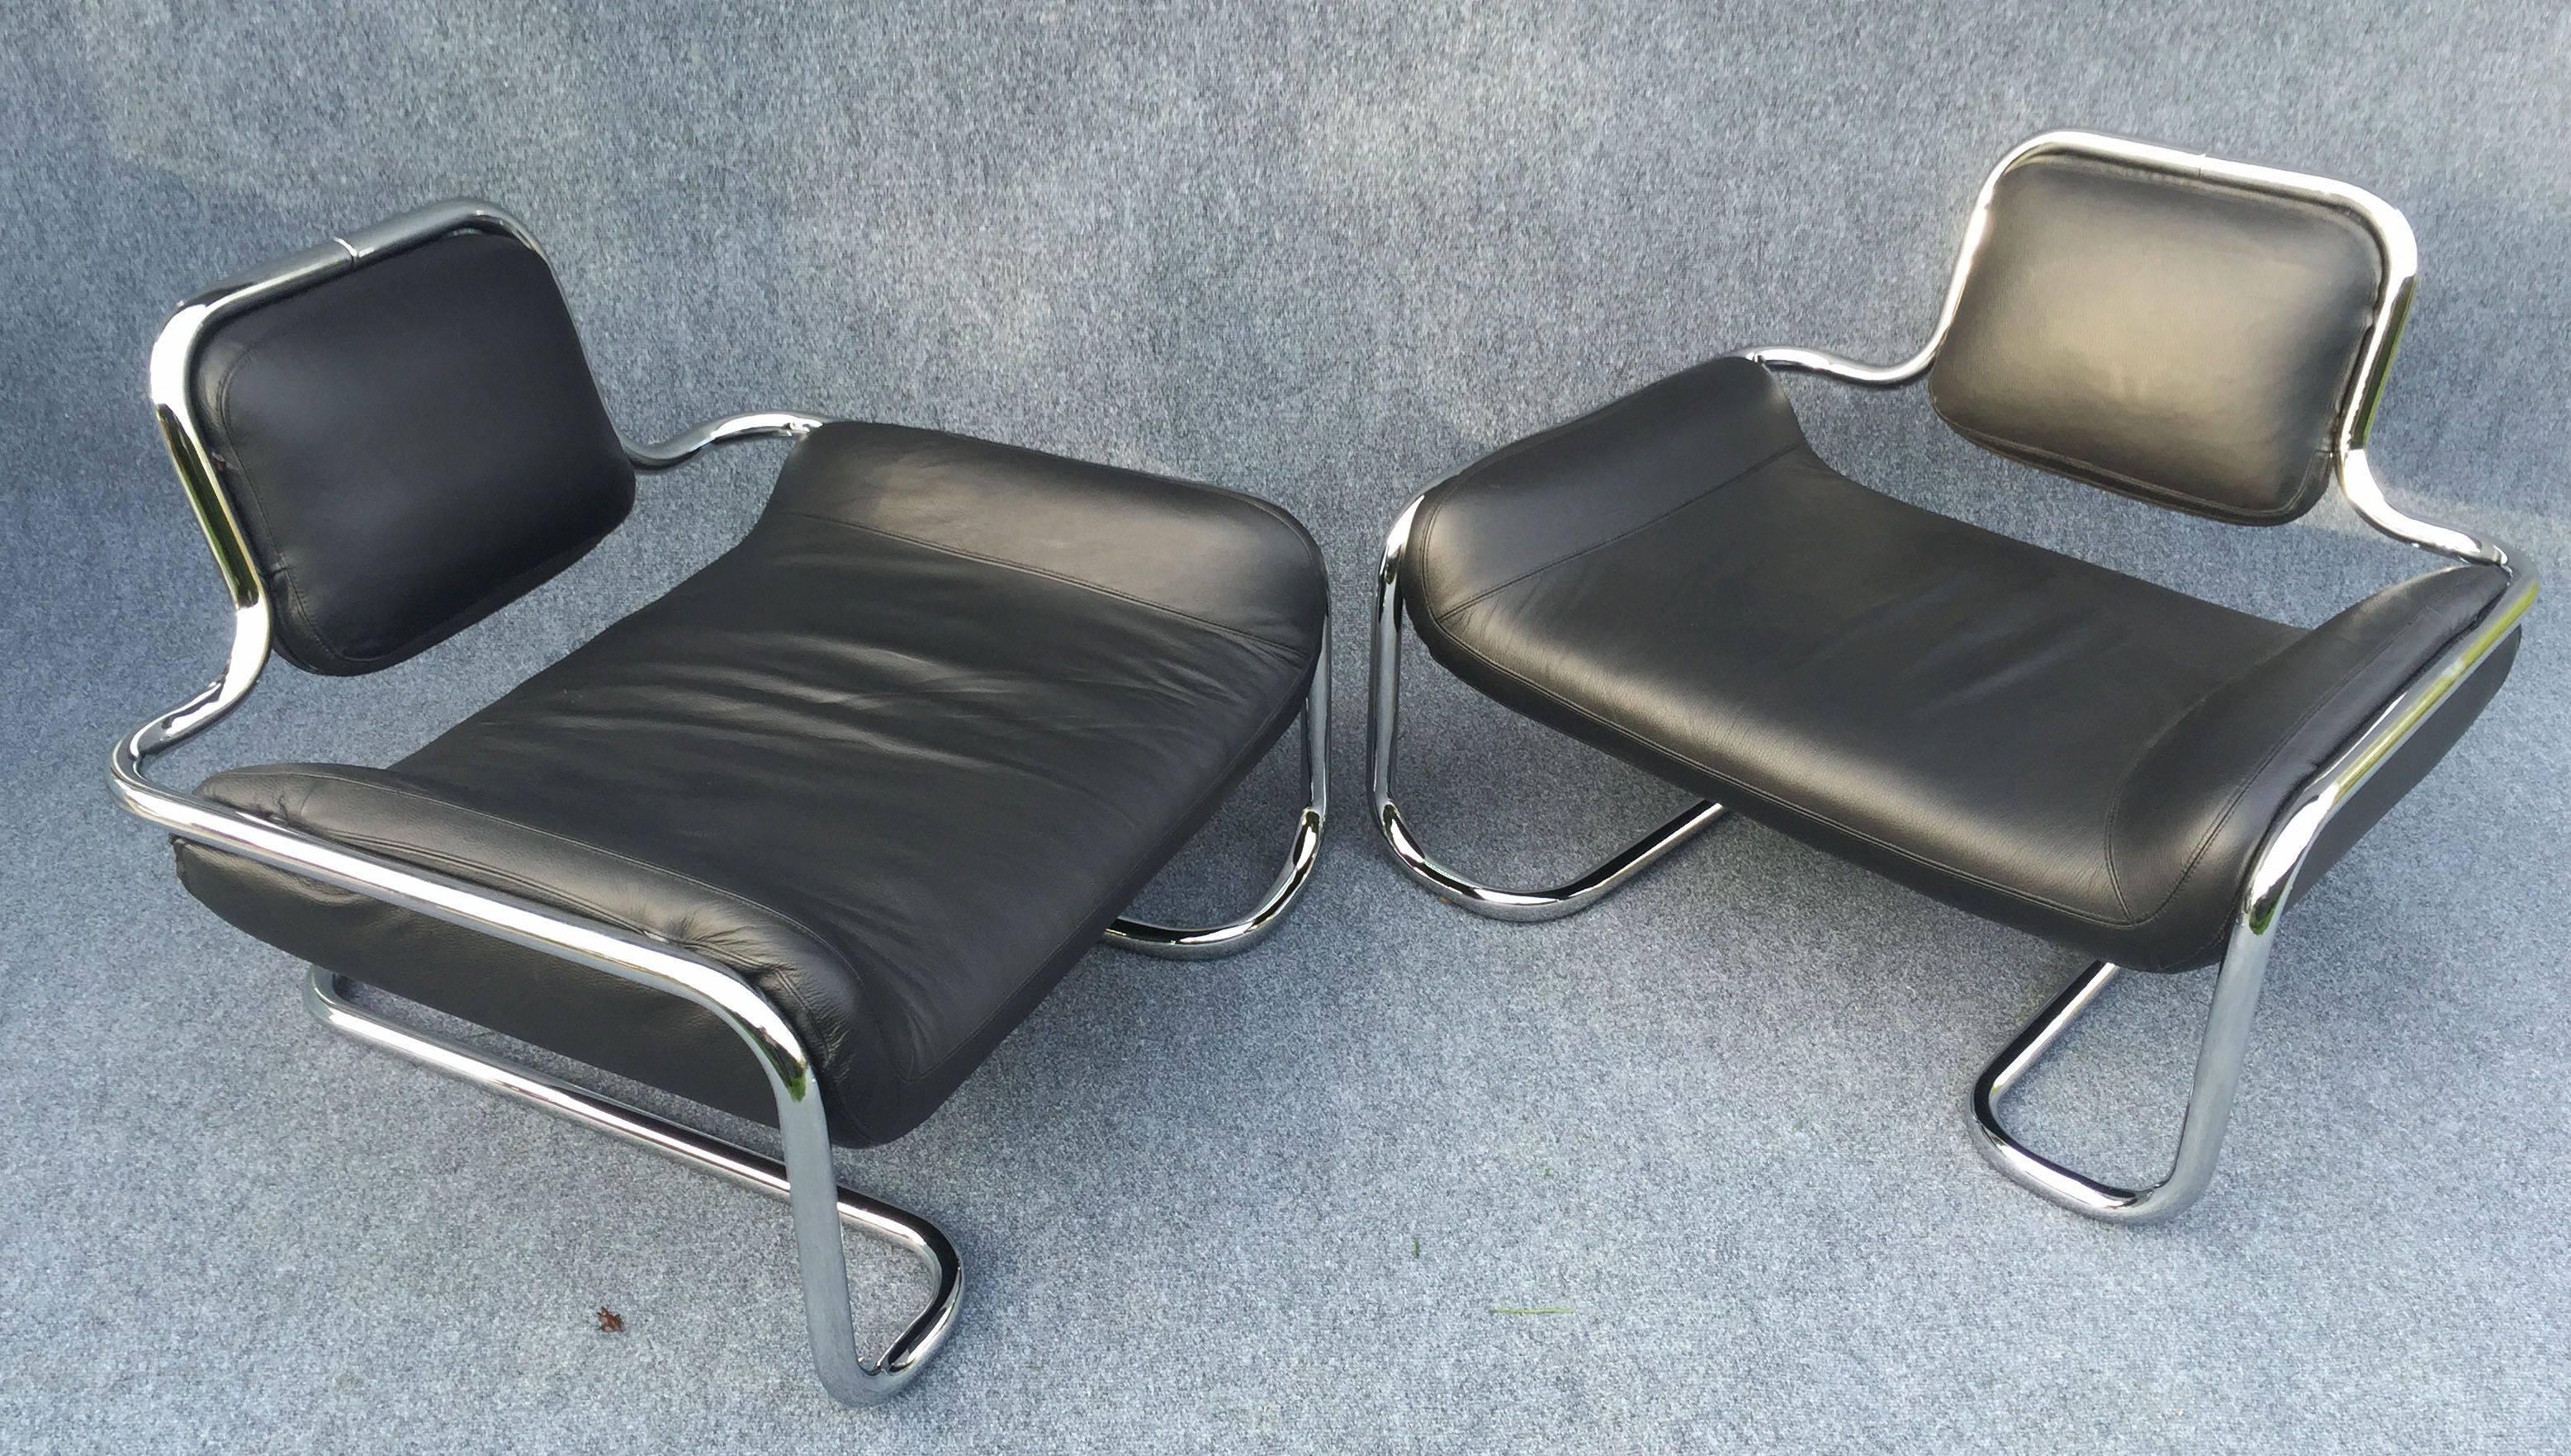 Late 20th Century A pair of Lemon Sole chairs by Kwok Hoi Chan for Steiner